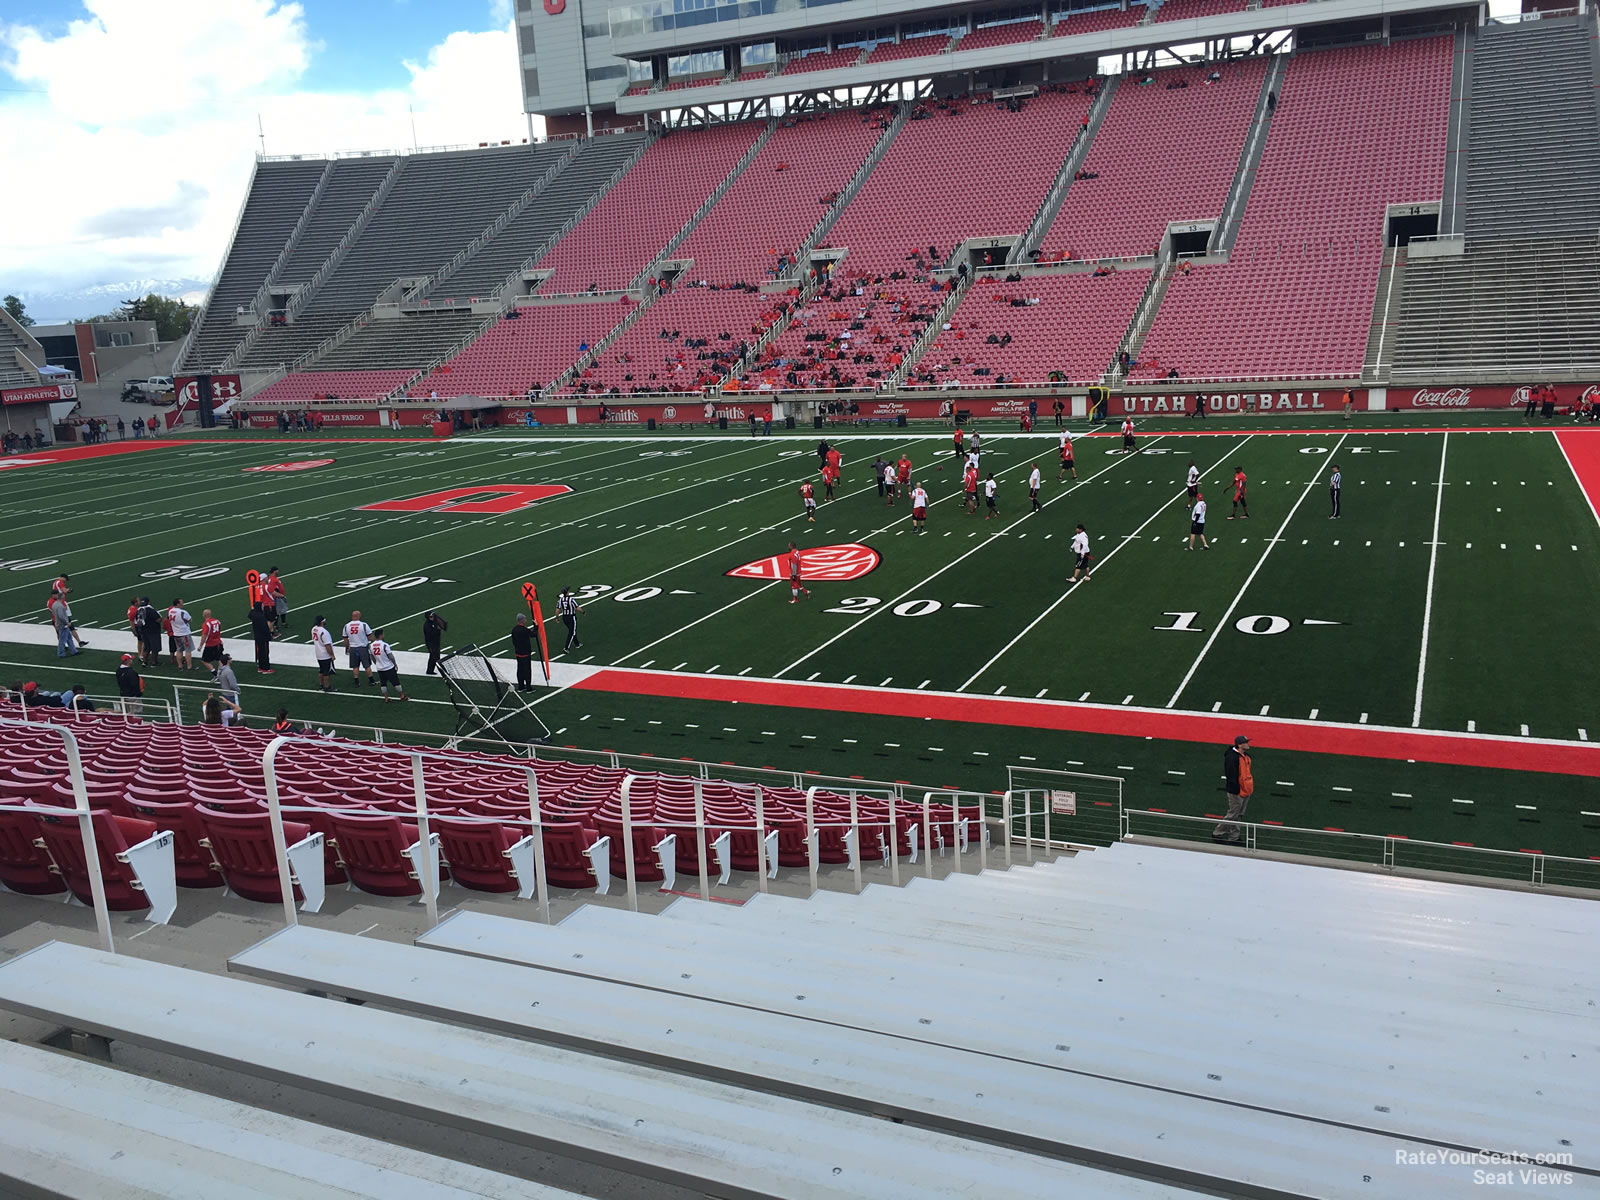 section e33, row 20 seat view  - rice-eccles stadium